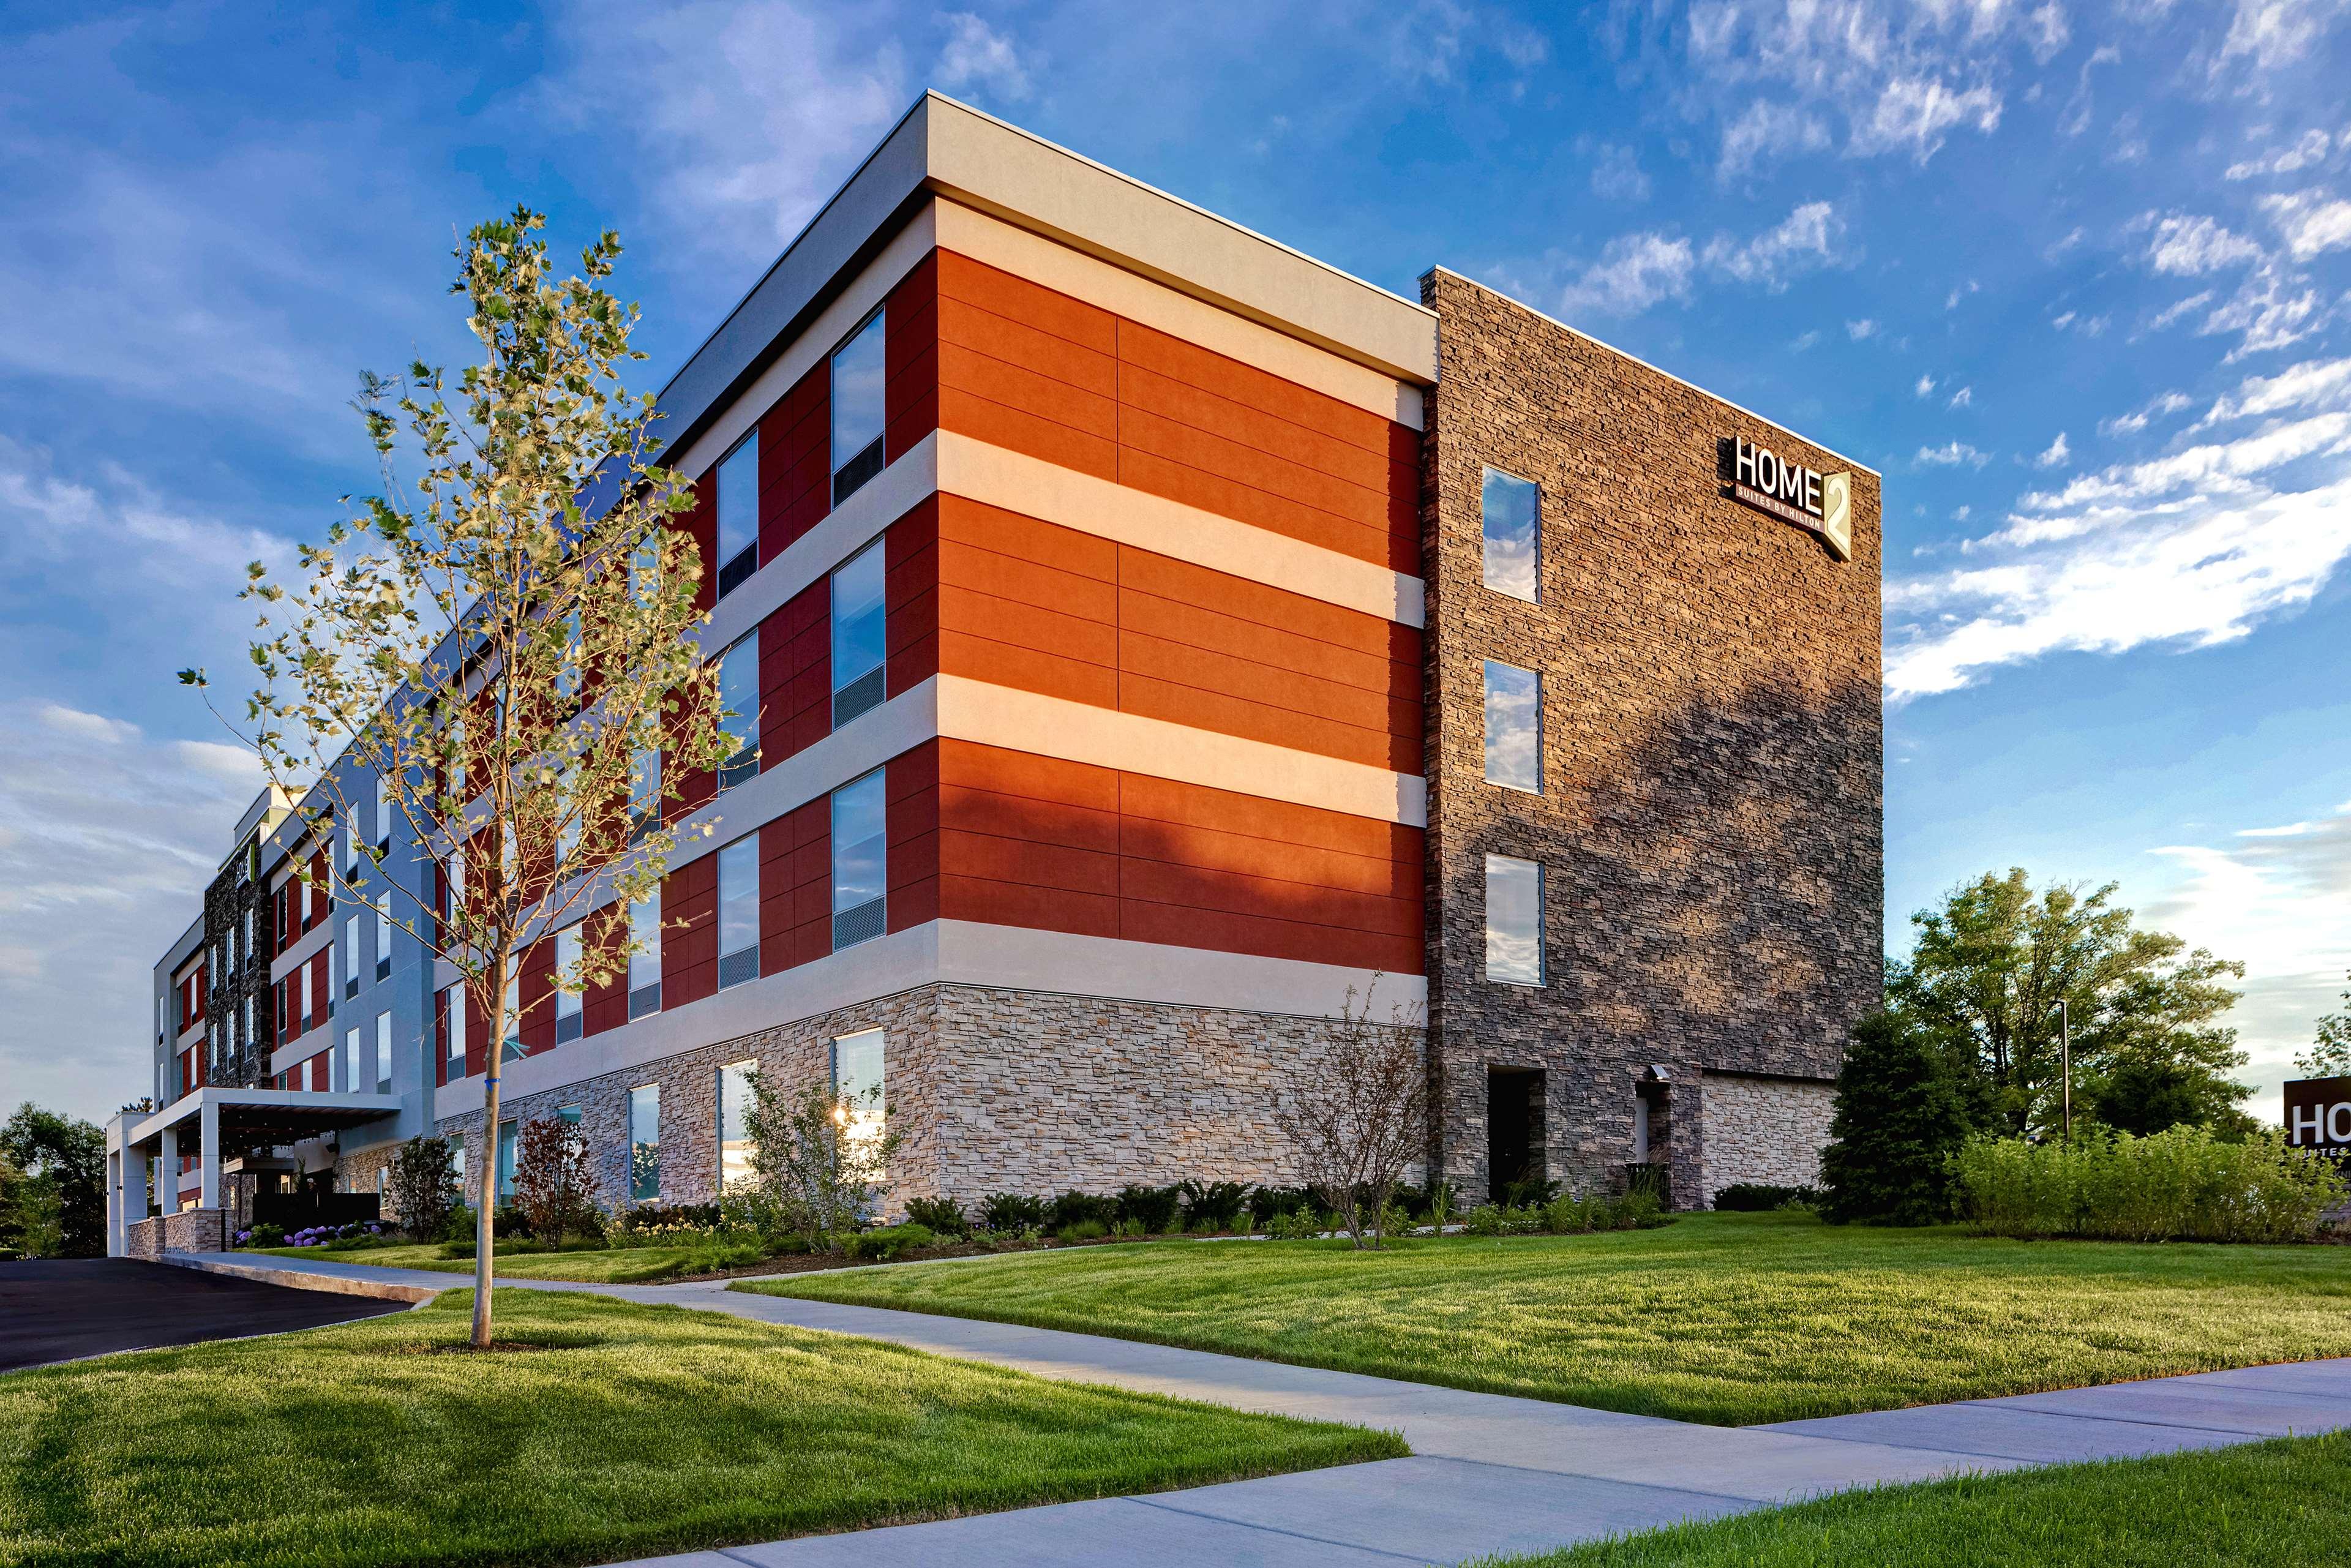 Home2 Suites by Hilton Lincolnshire Chicago image